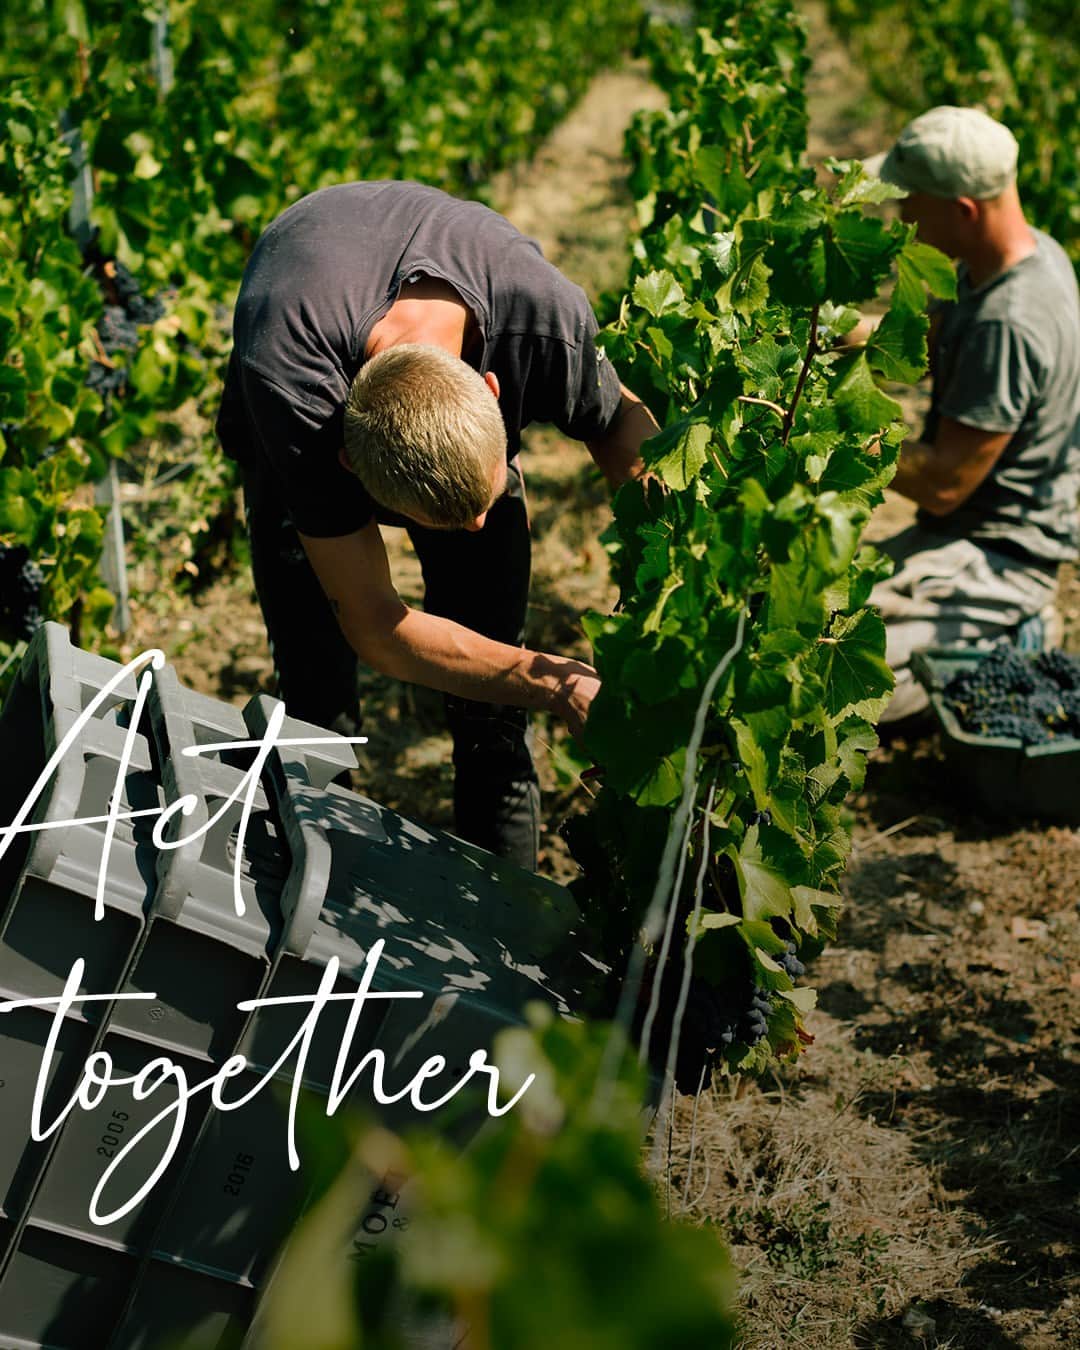 Moët & Chandon Officialのインスタグラム：「Teamwork. Did you know? At Moët & Chandon, during the harvest, we hire no less than 3,500 grape pickers – each trained to sort out the good grapes from the bad ones. This is how we act together for the Champagne region.⁣ ⁣ #NaturaNostra #MoetChandon⁣ ⁣ This material is not intended to be viewed by persons under the legal alcohol drinking age or in countries with restrictions on advertising on alcoholic beverages. ENJOY MOËT RESPONSIBLY.」